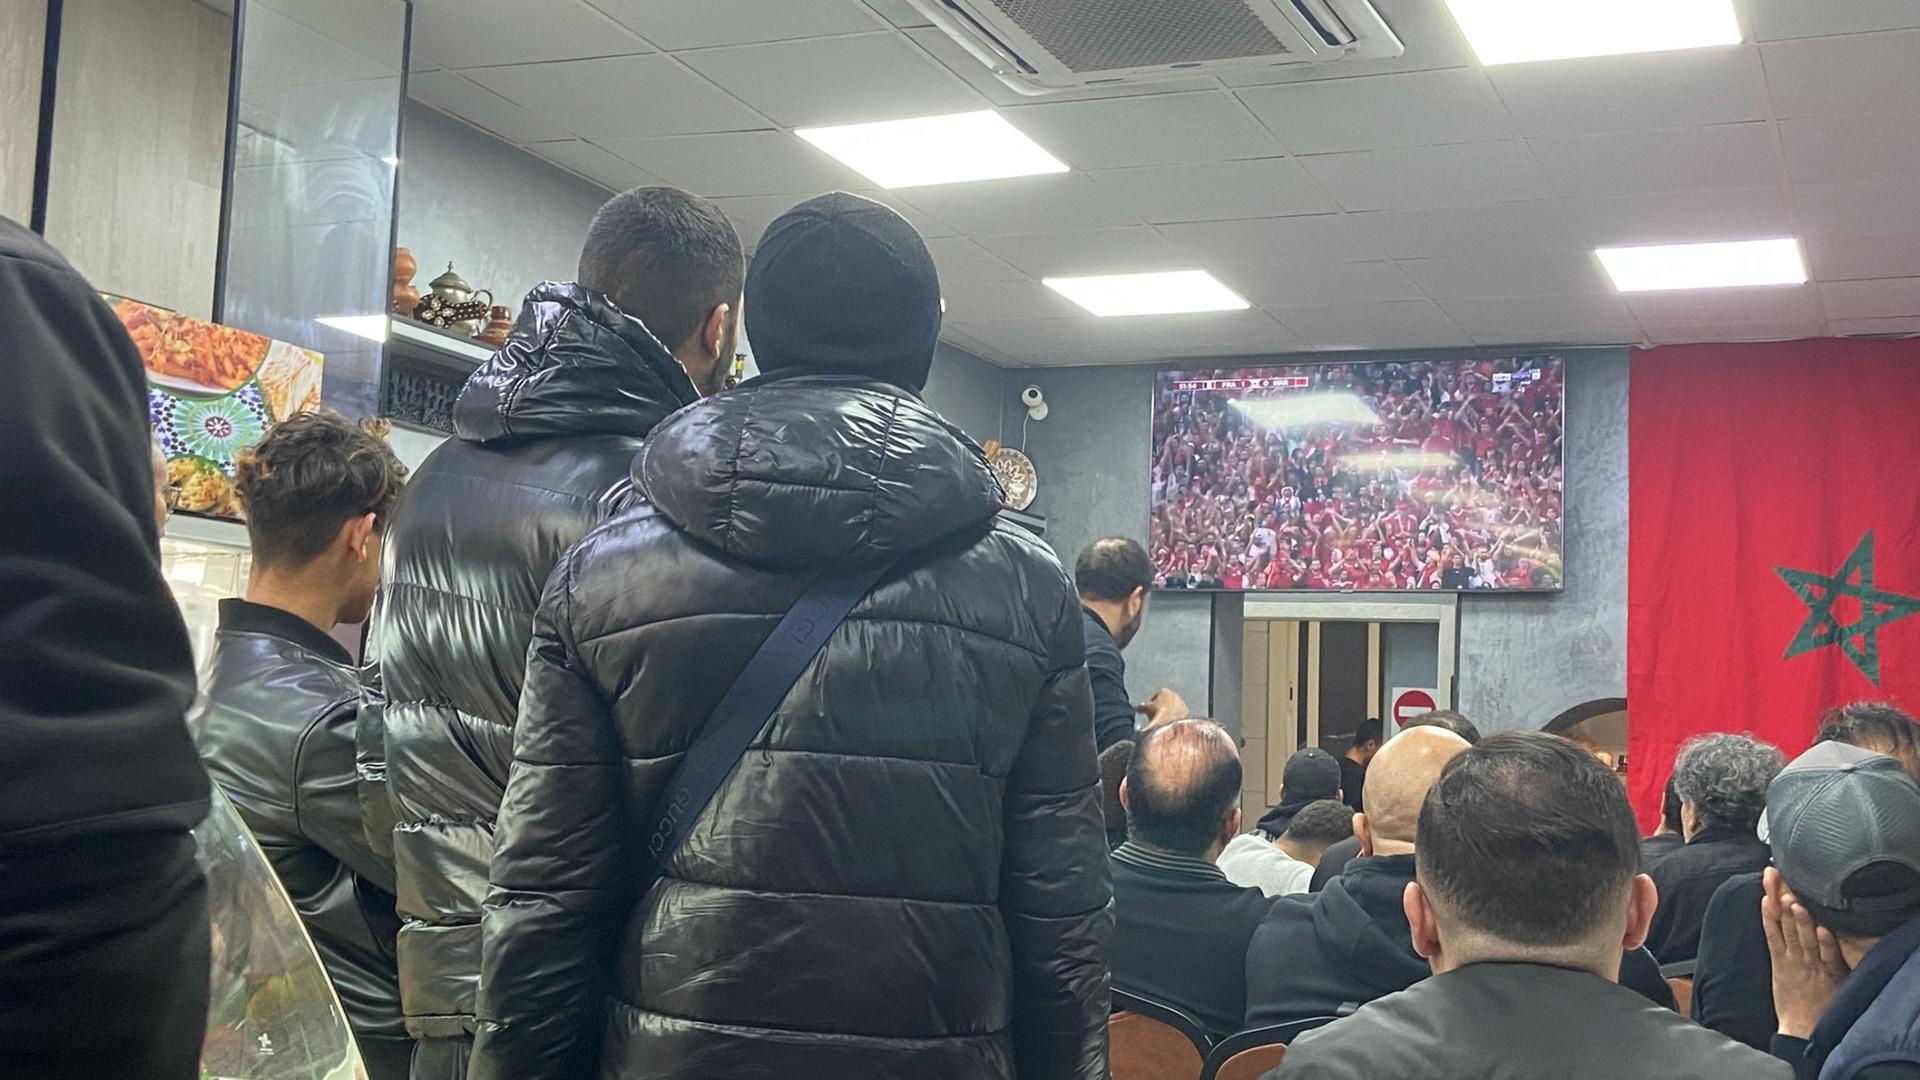 In a Moroccan restaurant in Barcelona, Arab fans with origins across Africa came together to cheer on the Atlas Lions. Viewers said politics often divides nations but sports bring people together.  